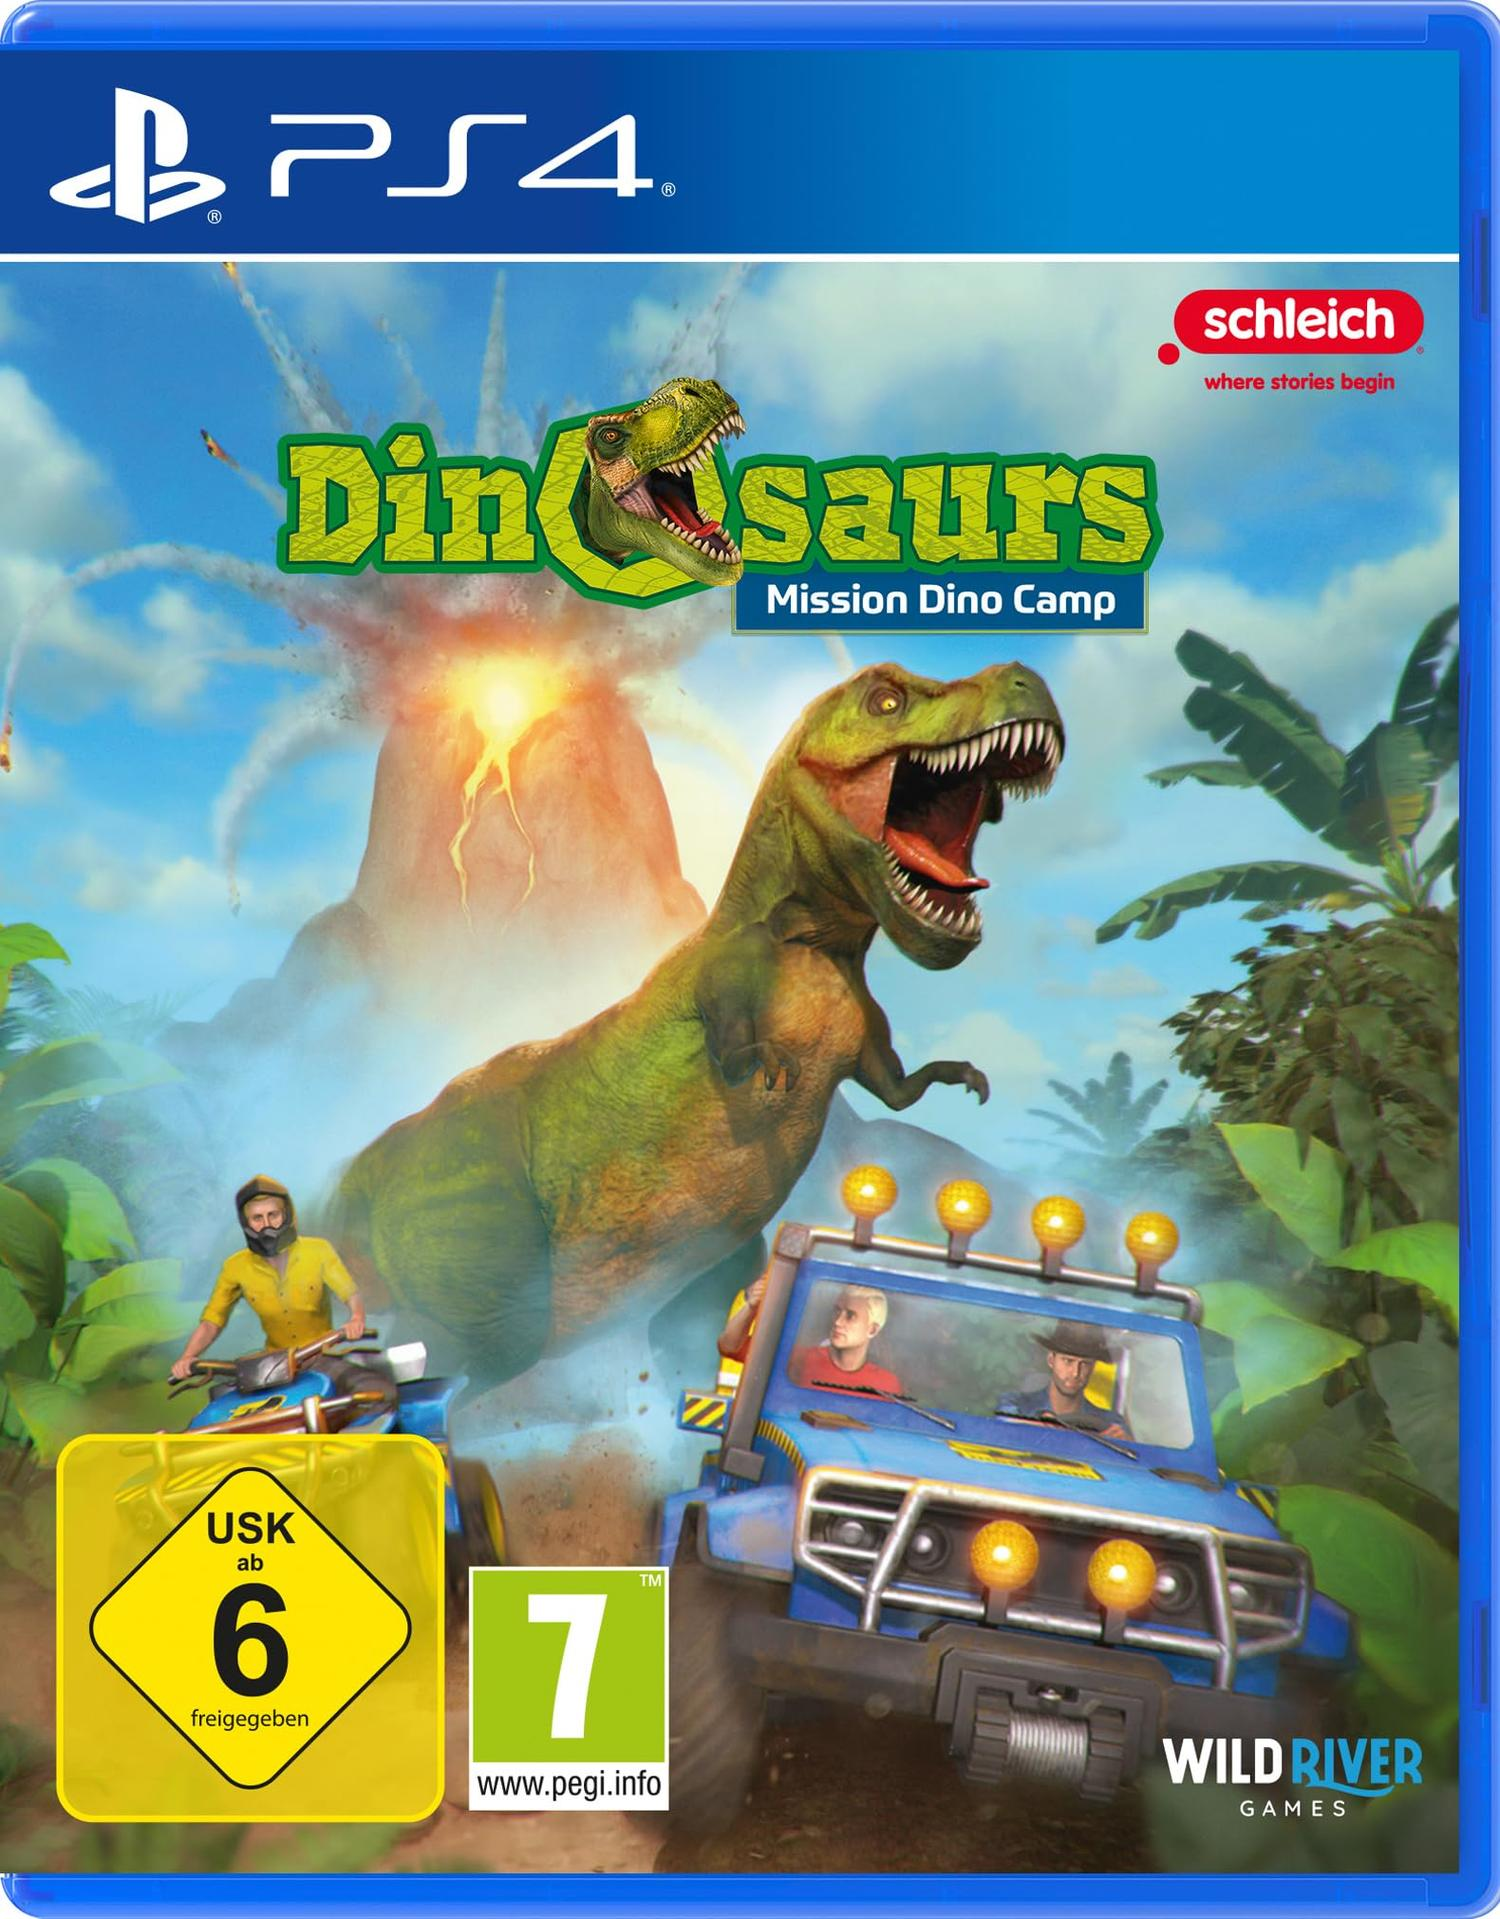 PS4 Schleich Dinosaurs 4] [PlayStation Camp Mission - Dino